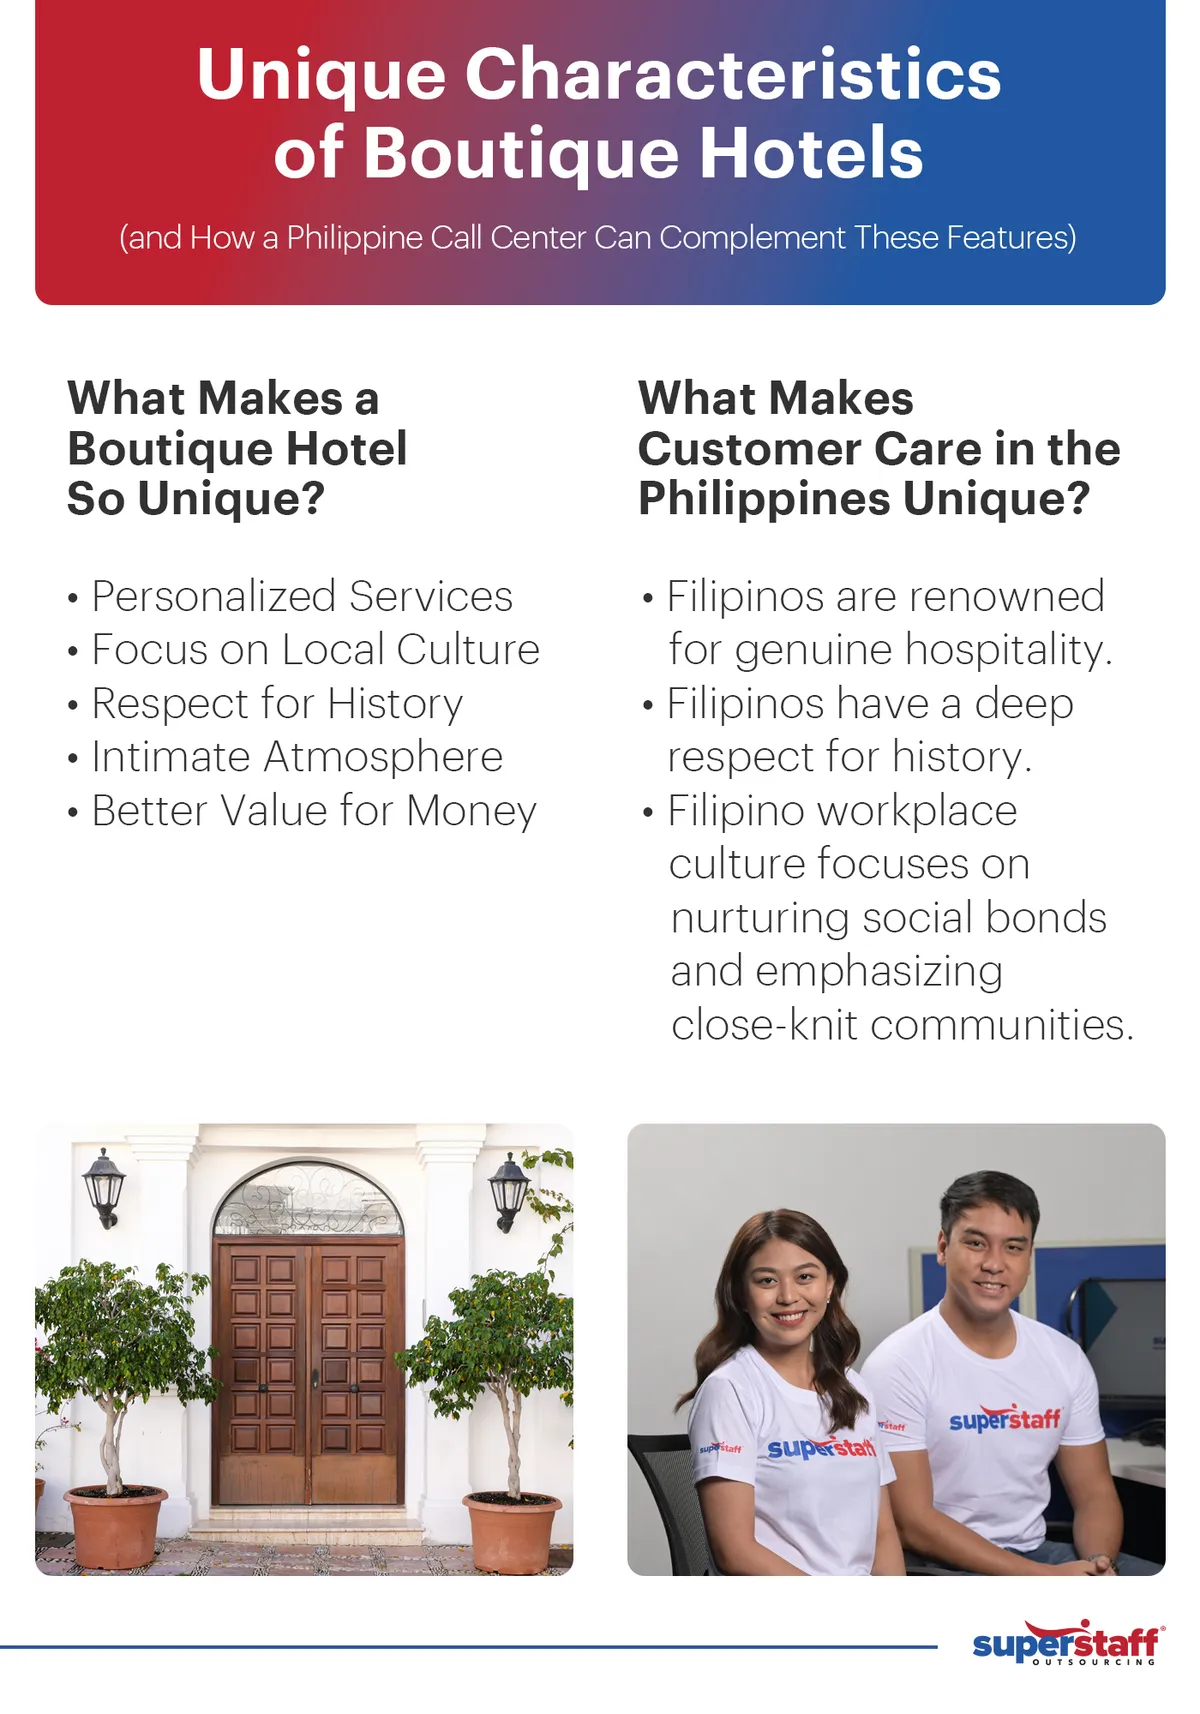 A mini infographic shows how Filipino traits compliment the unique qualities of boutique hotels. 